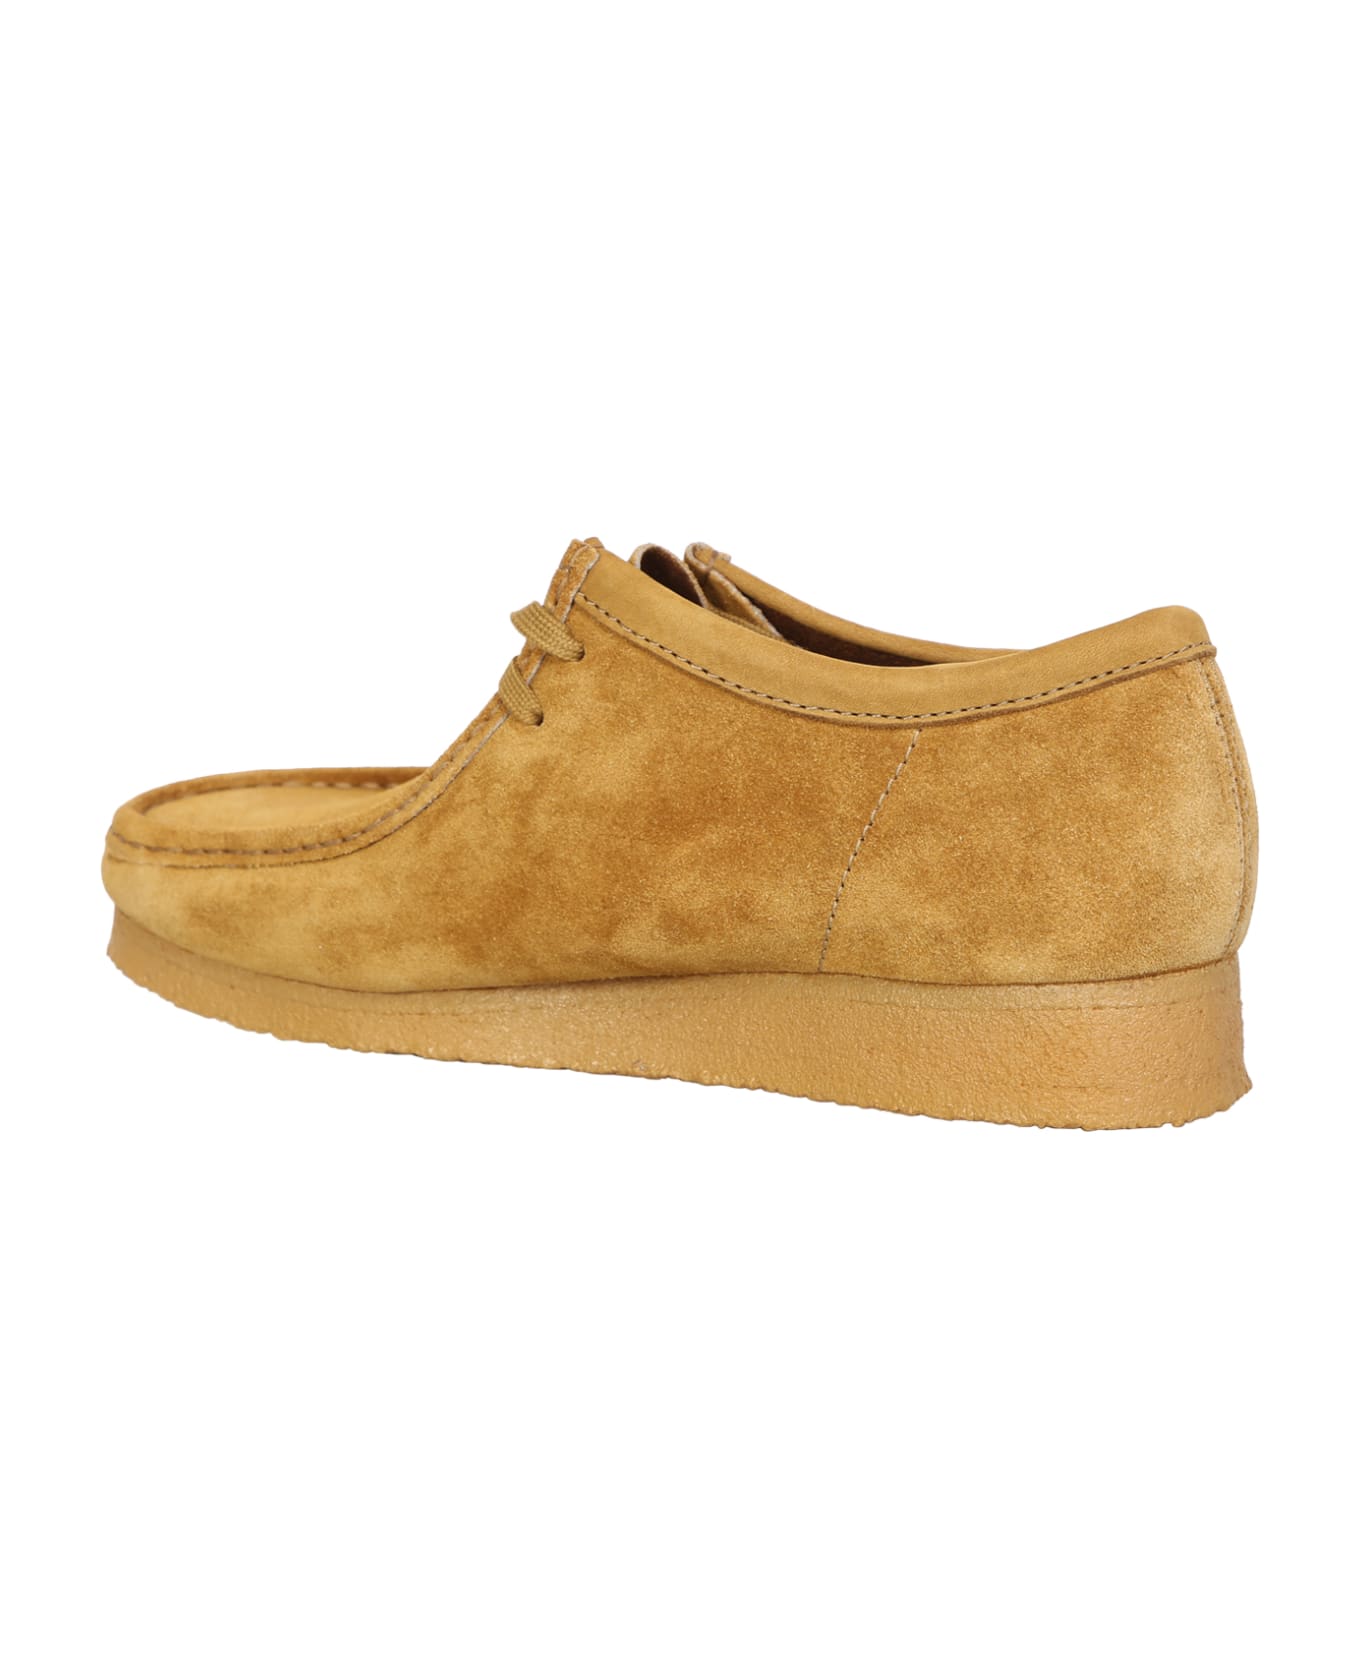 Clarks Wallabee Light Brown Ankle Boots - Brown